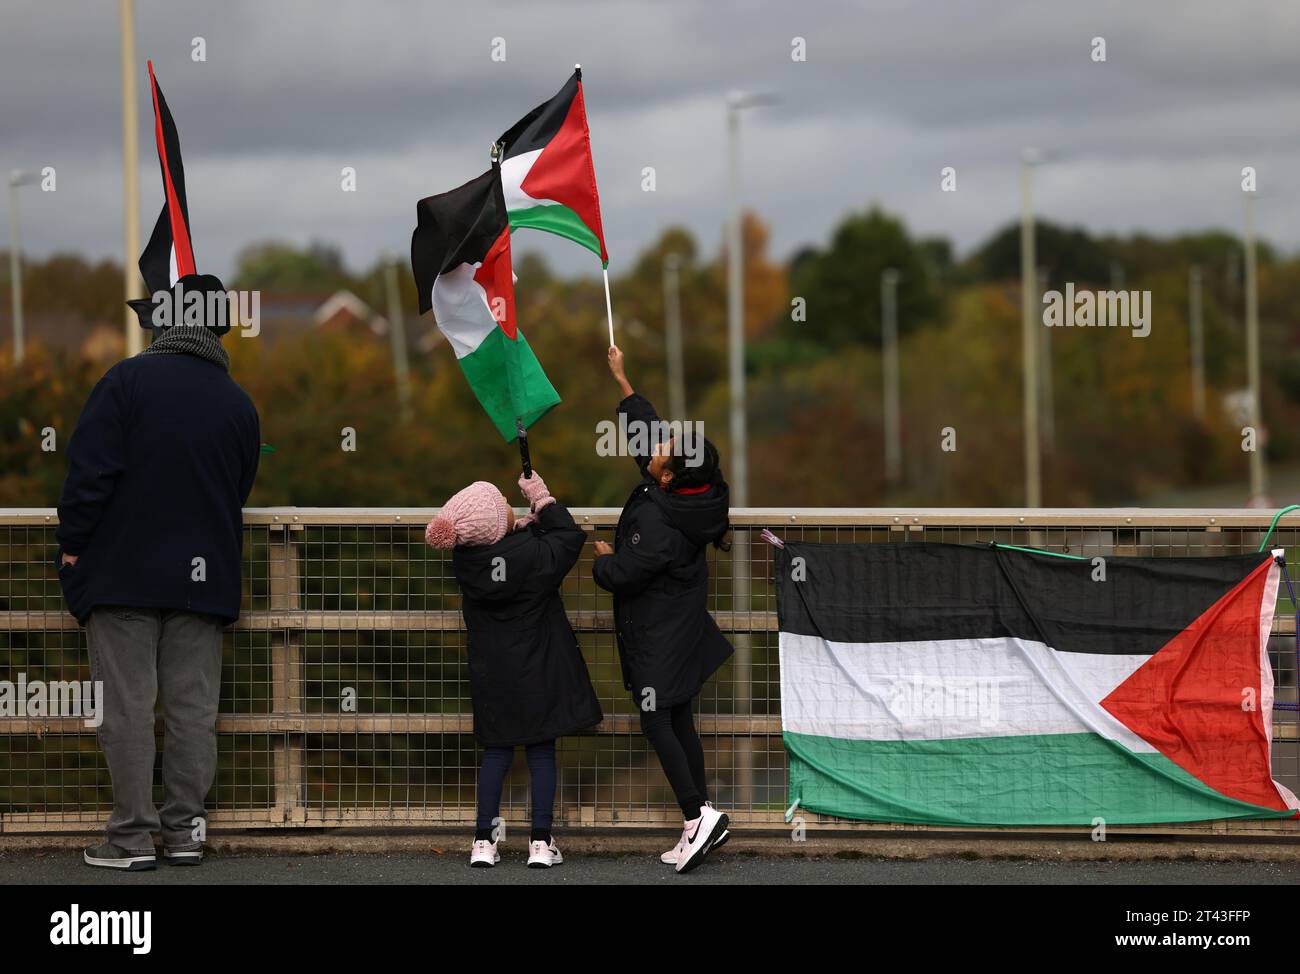 Leicester, Leicestershire, UK. 28th October 2023. Young protesters wave flags during a pro-Palestinian demonstration and banner drop near to the base of UAV Tactical Systems. UAV Tactical Systems is an Israeli-French company manufacturing drones sold to the British army, Israel and international arms markets. Credit Darren Staples/Alamy Live News. Stock Photo